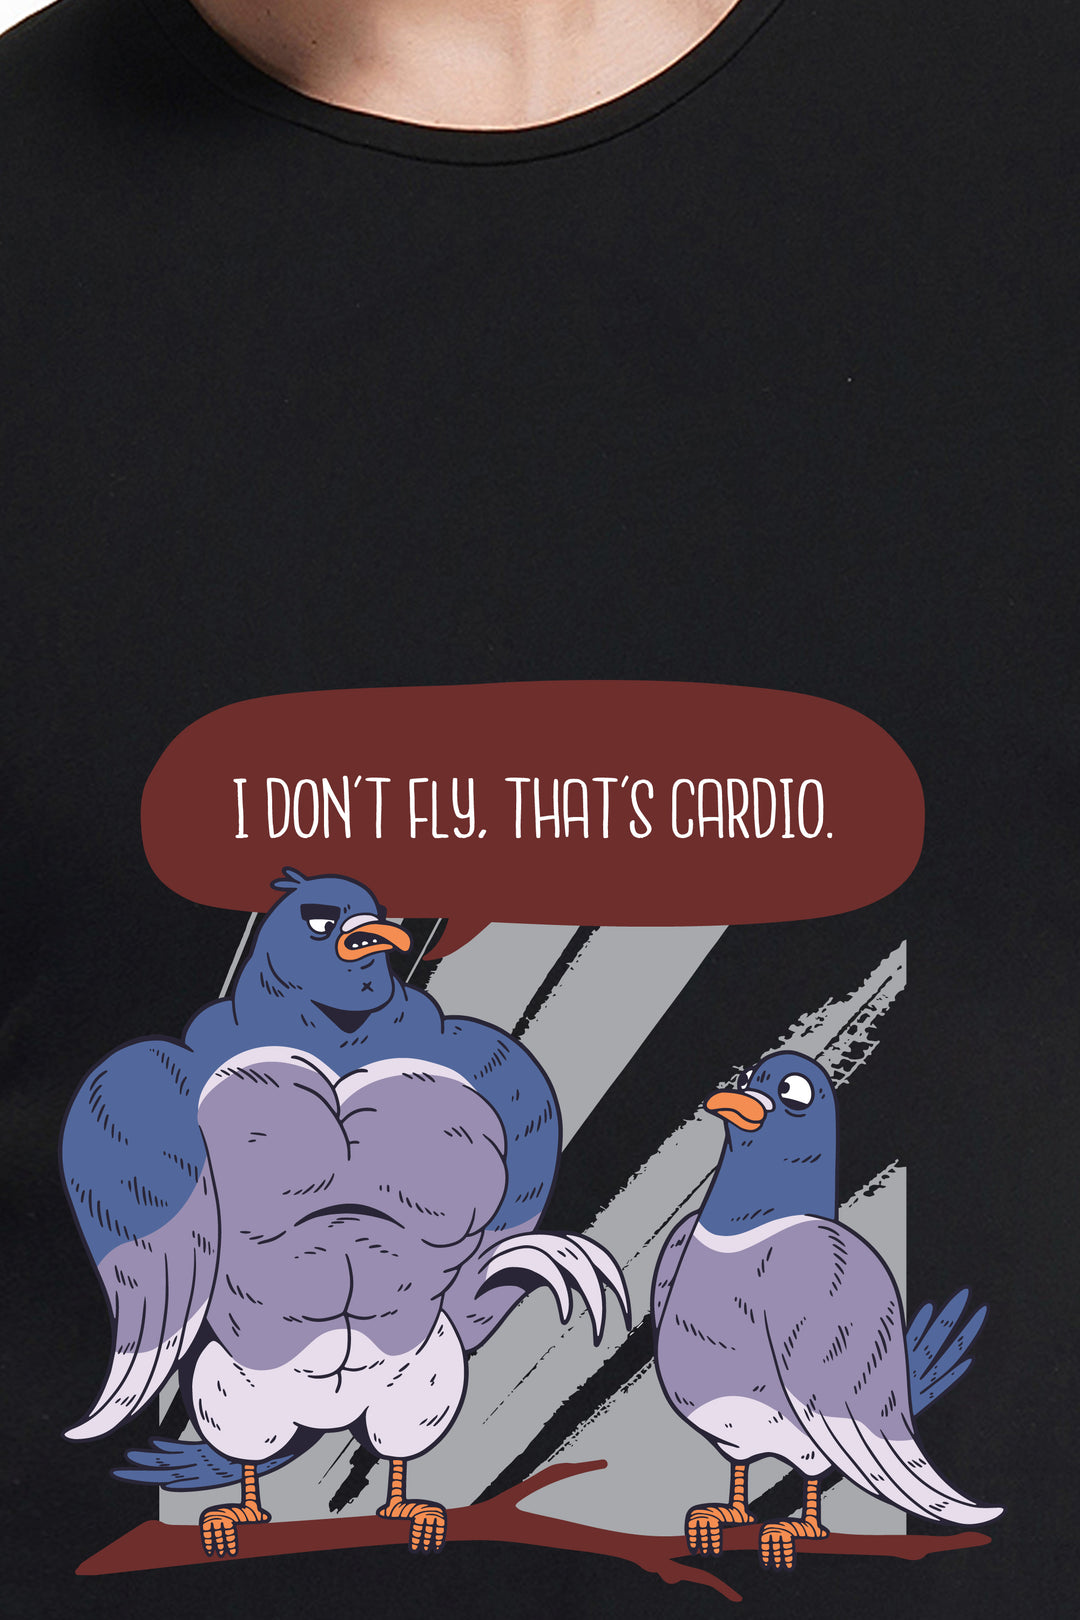 I don't Fly Thats Cardio - Funny Gym Tee